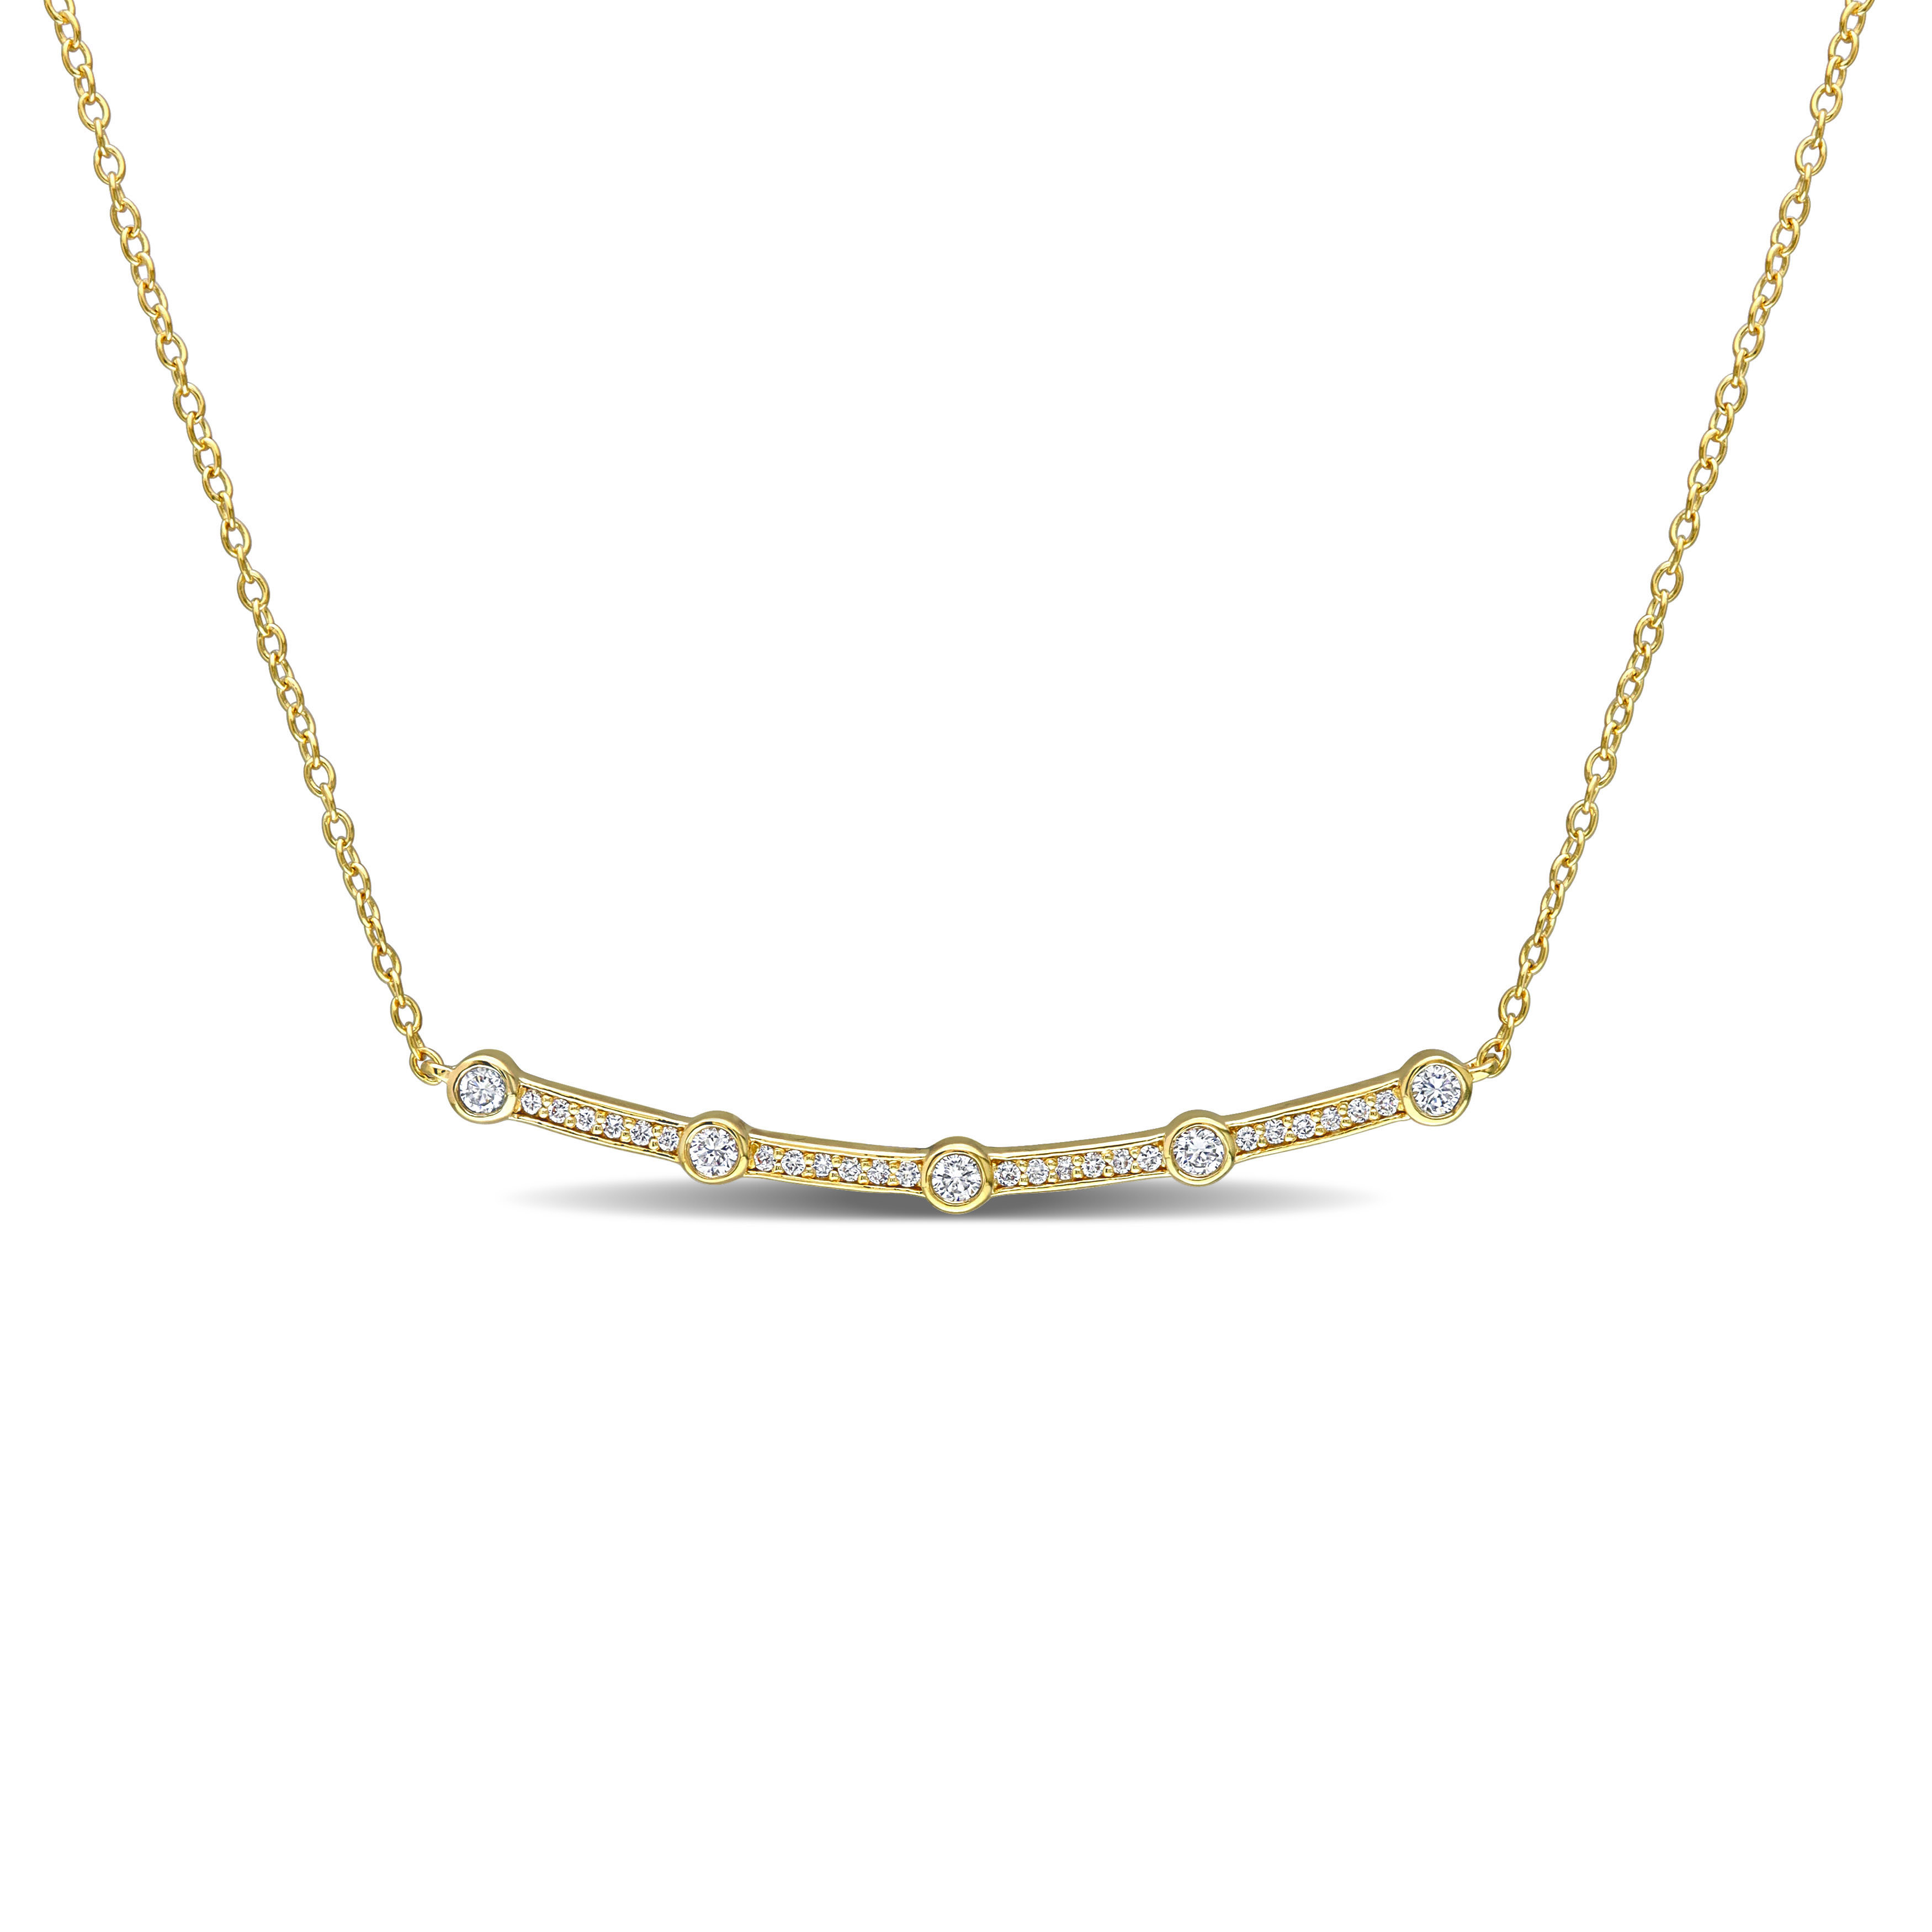 1/3 CT TGW Lab Created Diamond Bar Pendant with Chain in 18k Yellow Gold Plated Sterling Silver - 17 in.